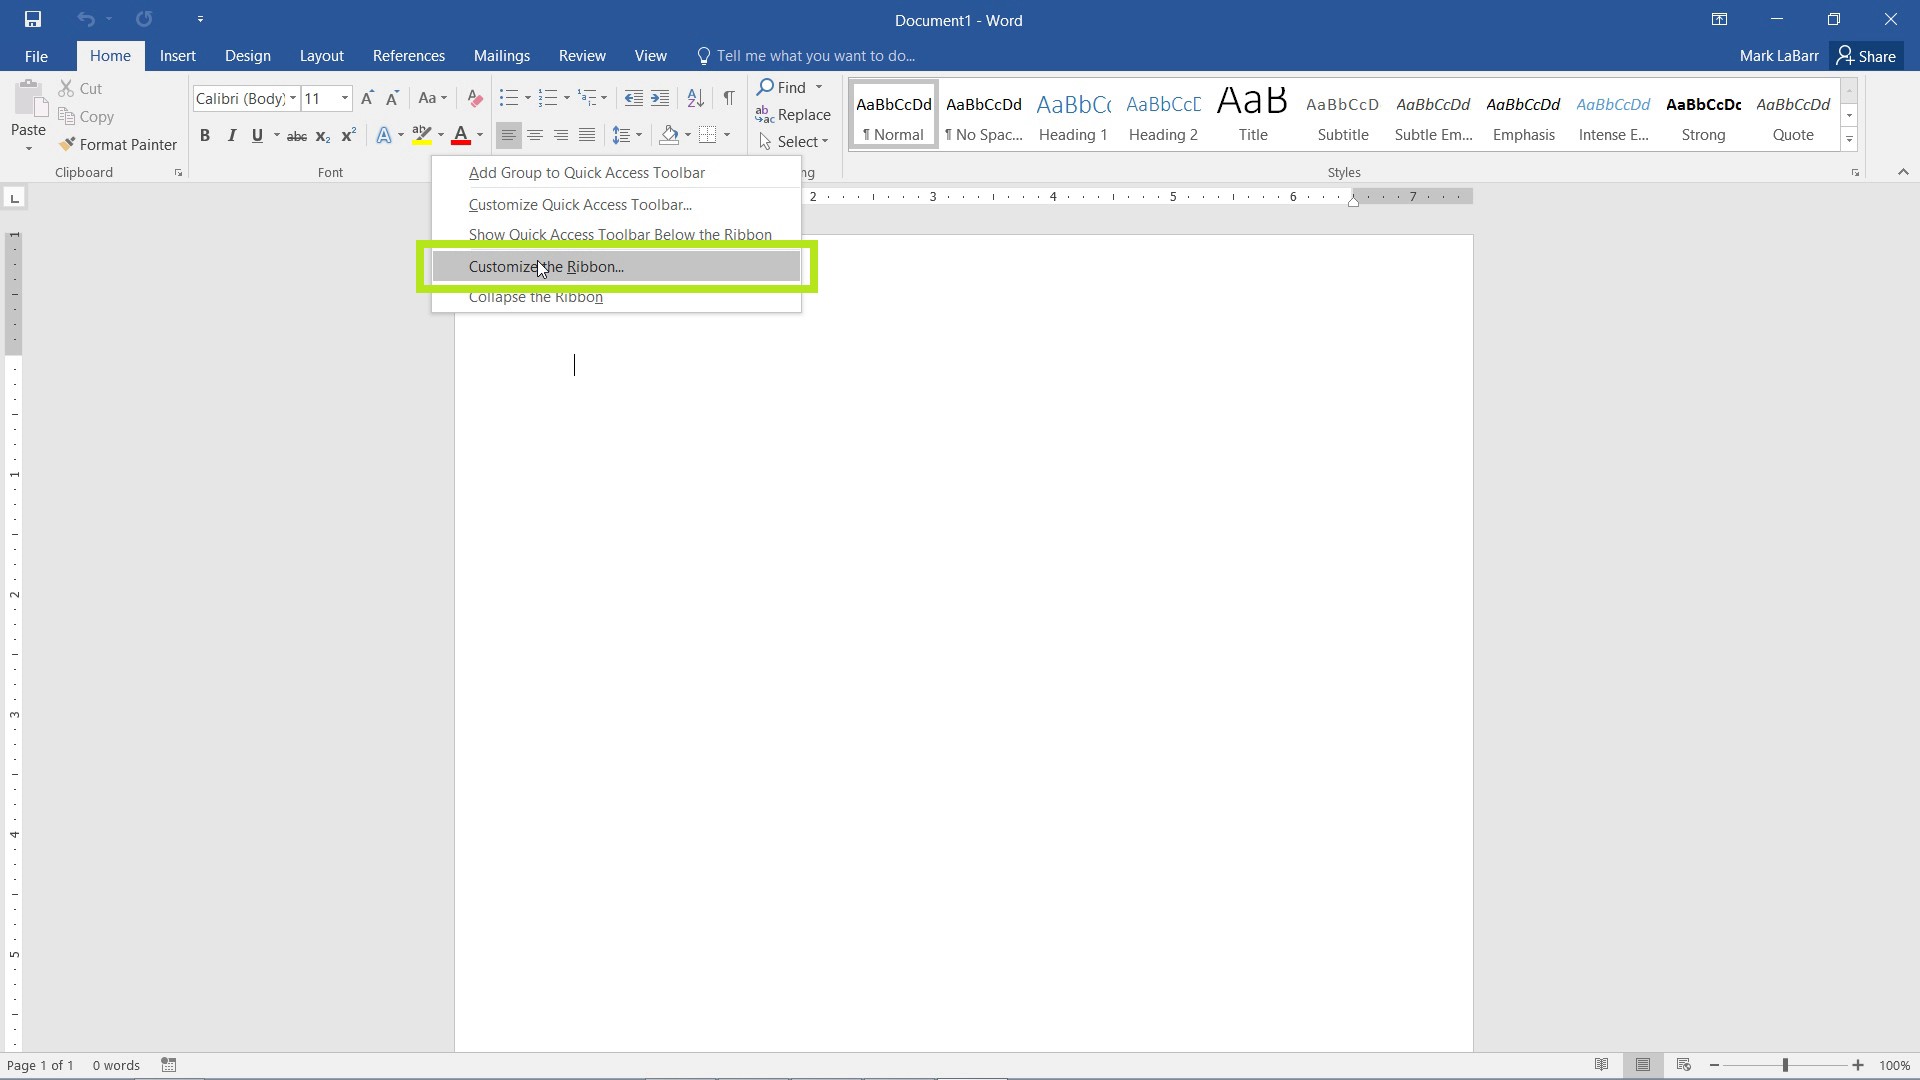 Customize the Ribbon in Word 2016